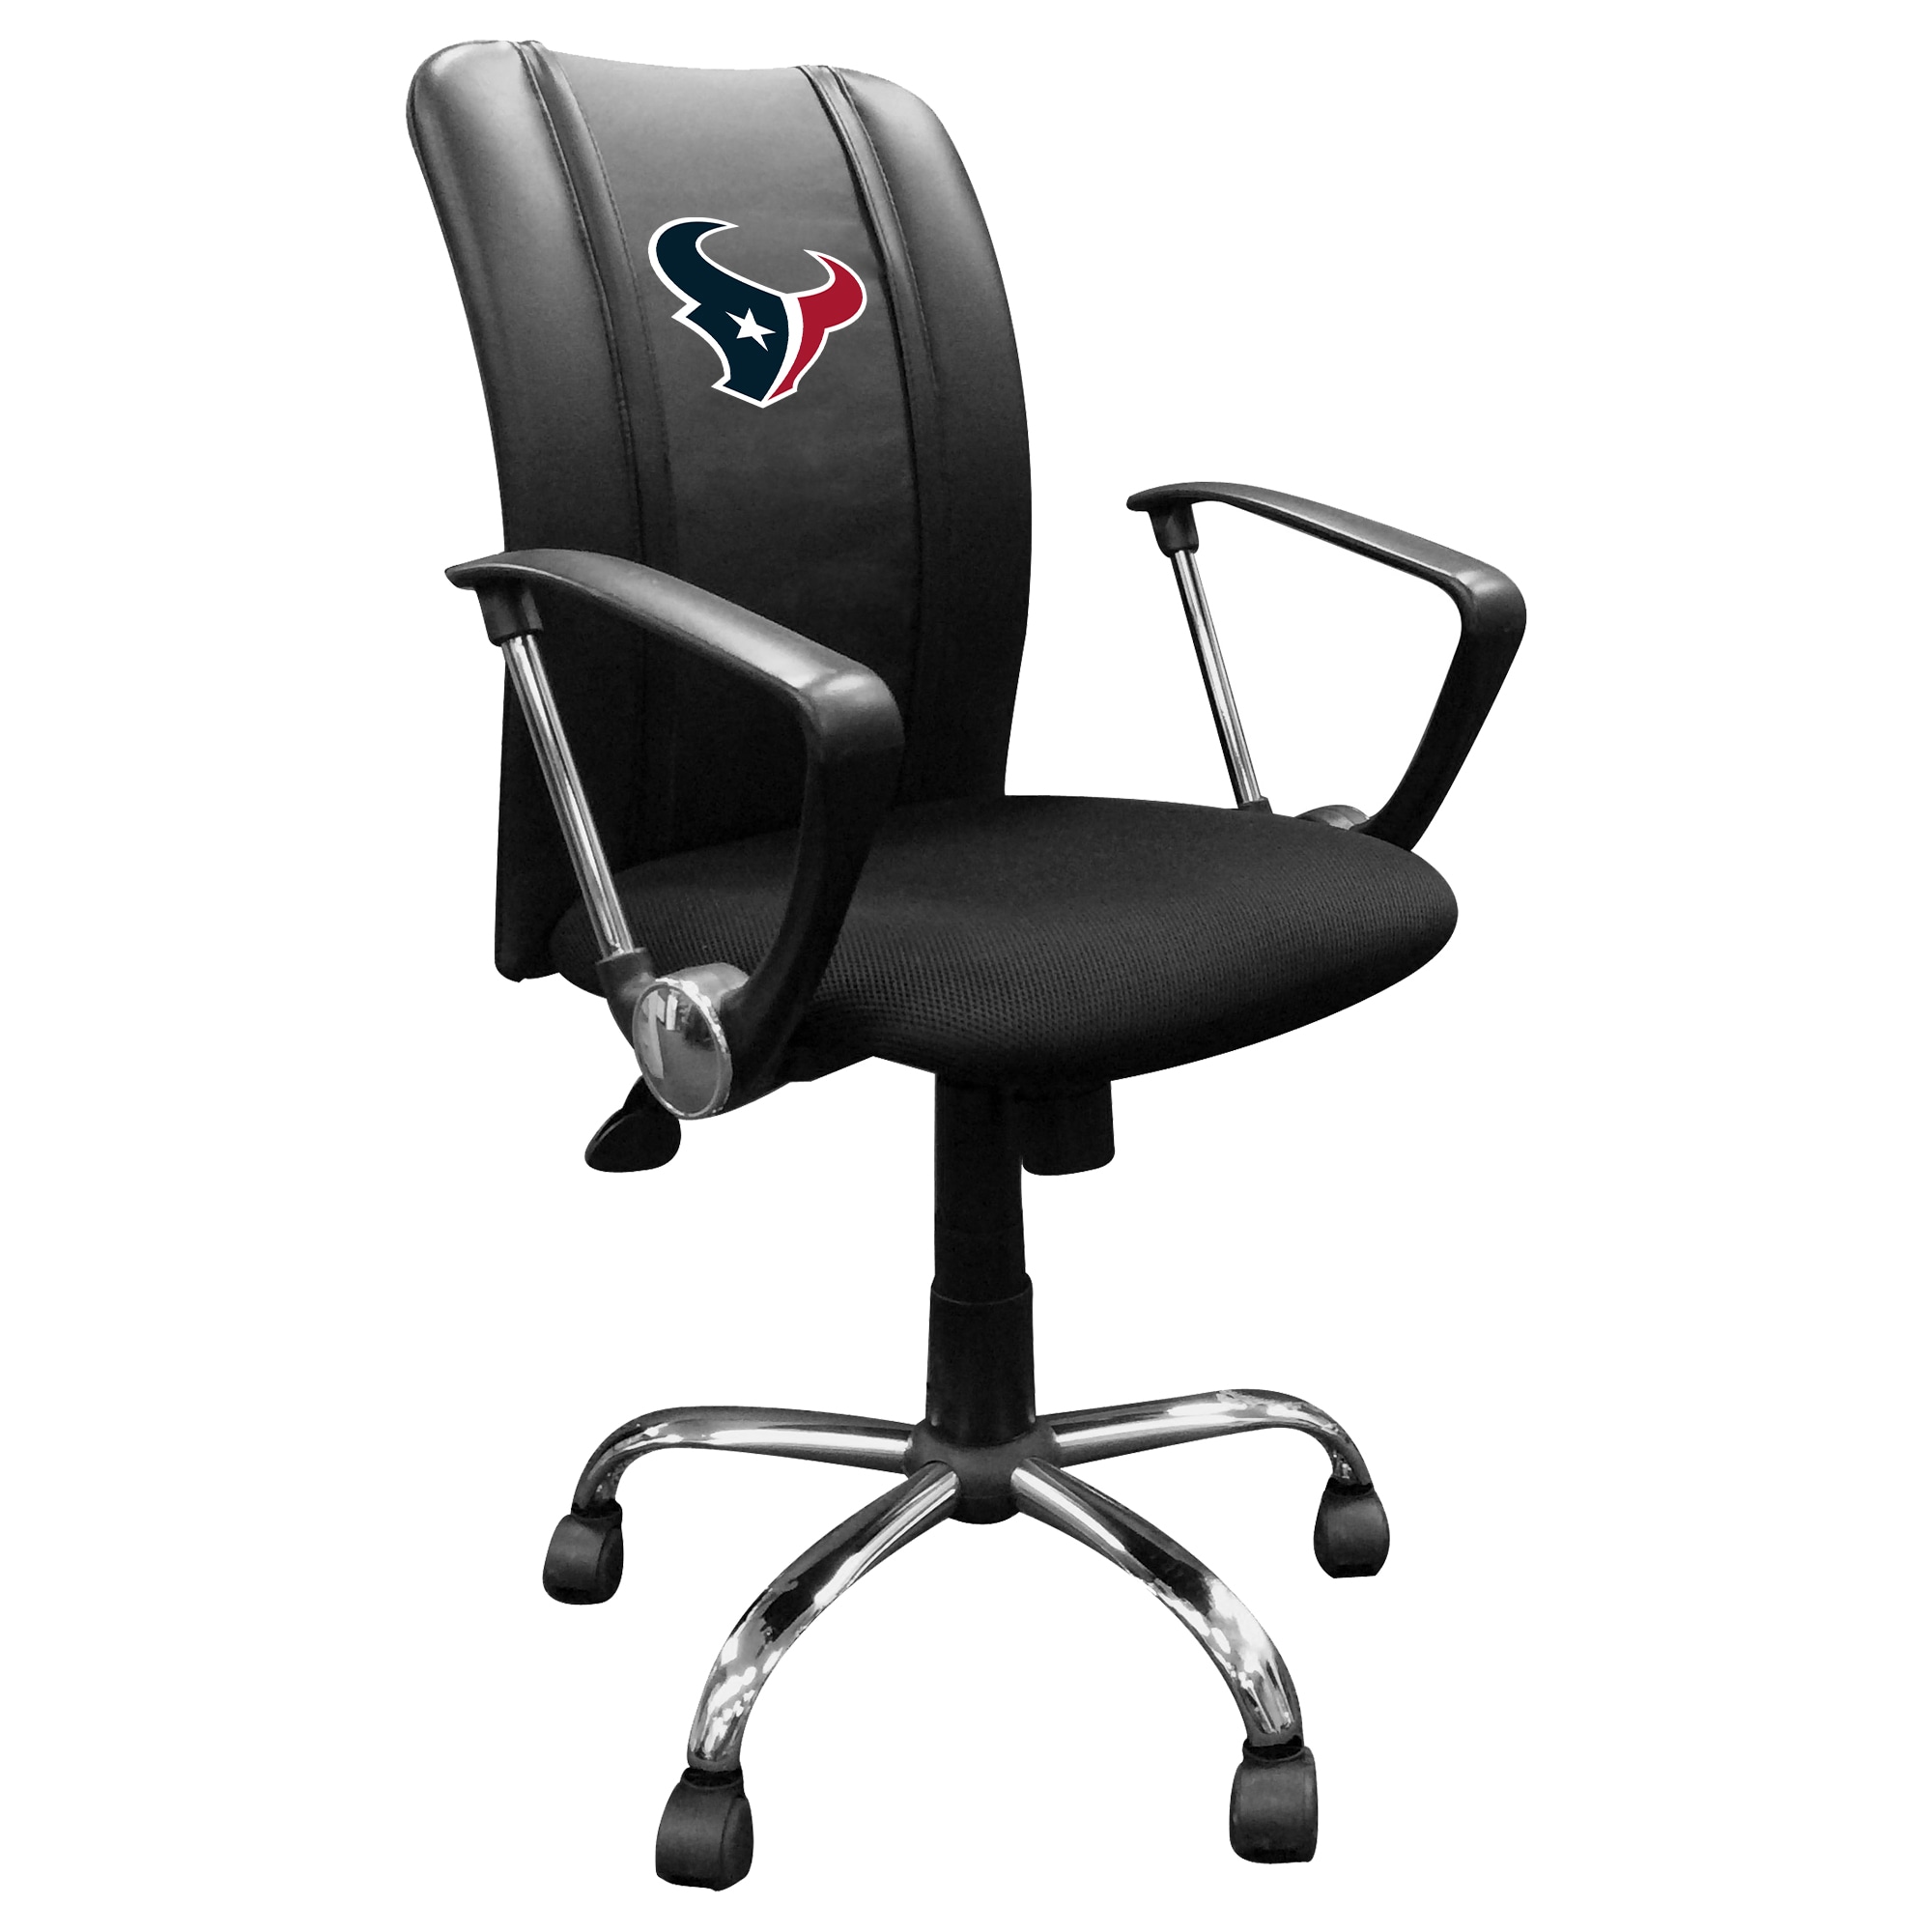 Houston Texans Curve Task Chair - image 1 of 1